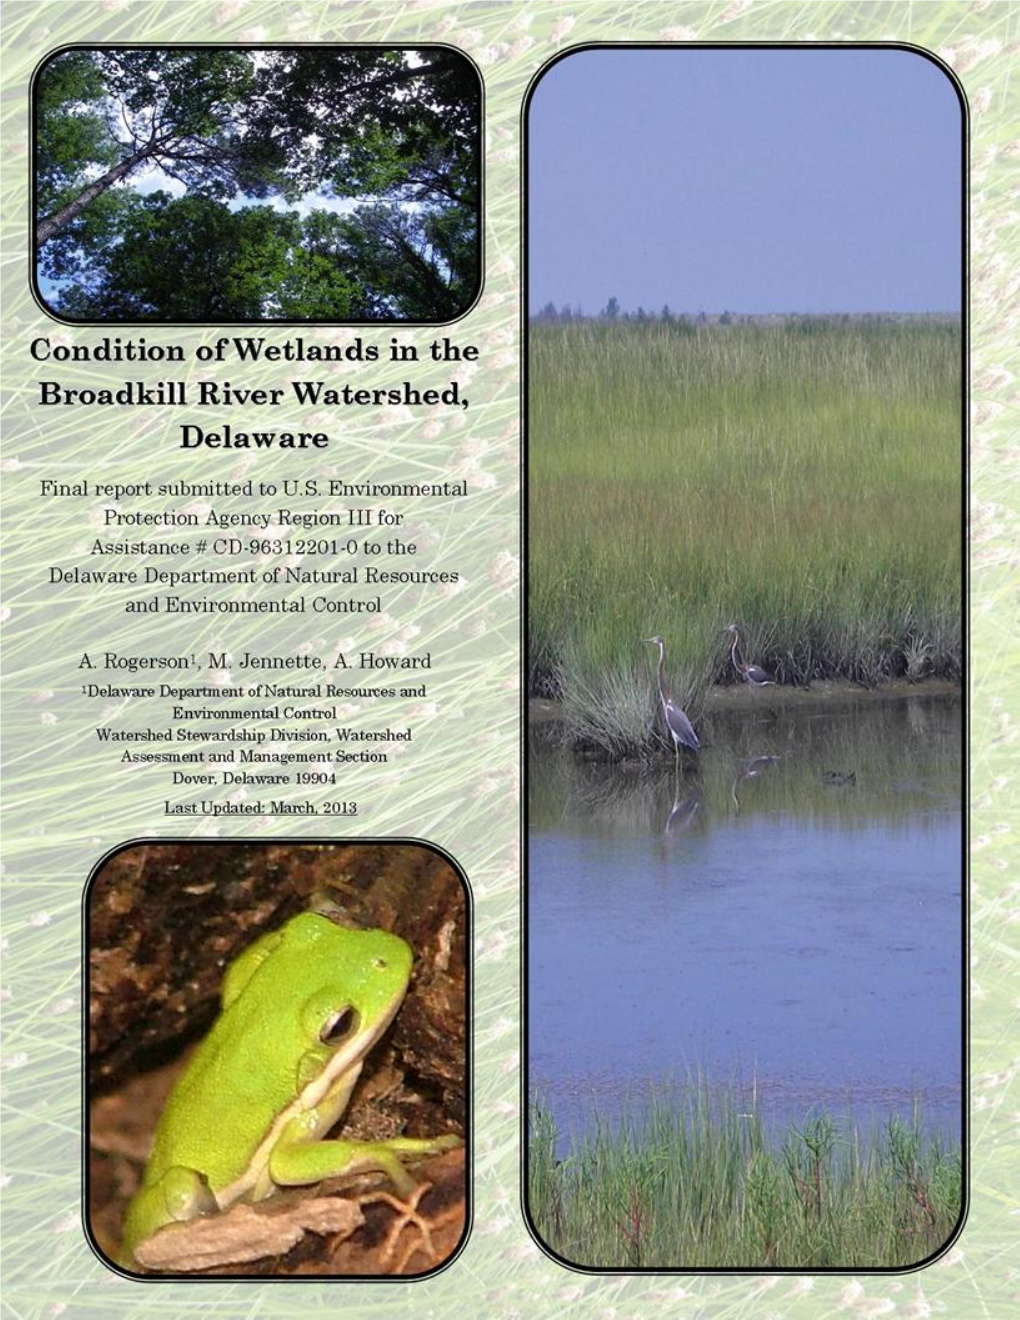 Condition of Wetlands in the Broadkill River Watershed, Delaware